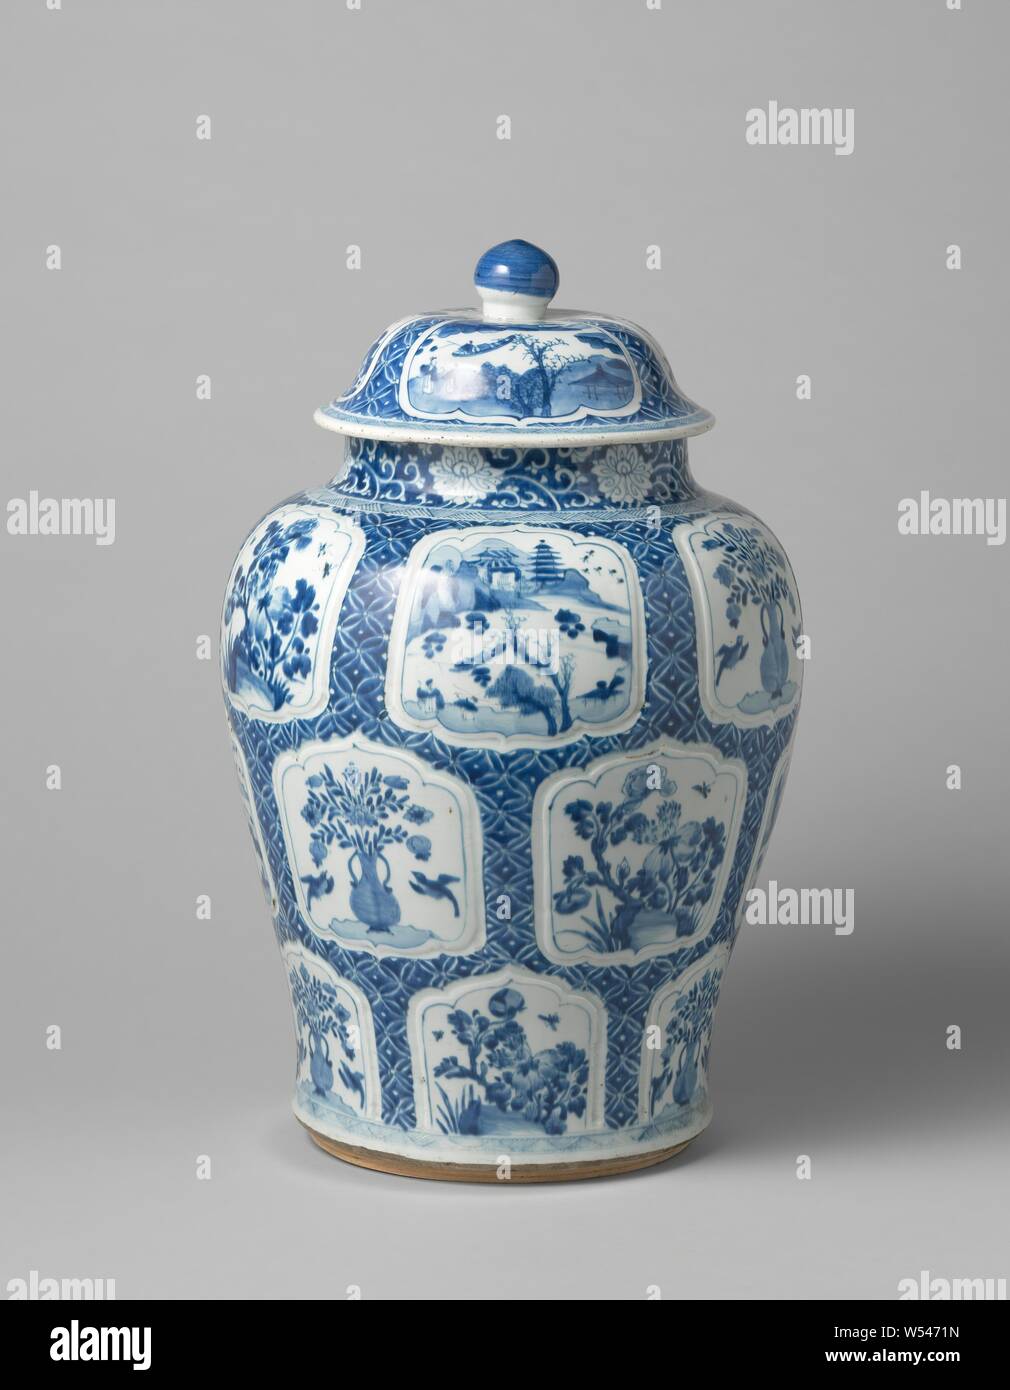 Baluster covered jar with flower vases, flowering plants and landscapes in panels, Baluster-shaped porcelain covered pot, painted in underglaze blue. The belly is covered with napkin work containing saved, modeled, scalloped cartouches with a flower vase (lotus) with two birds, flowering plants (peony) near a rock or a river cap with two people, a boat, pavilions, trees and mountains. The neck with stylized lotus tendrils. On the shoulder and around the foot a band with hatching. The lid with the same decoration. Blue White., anonymous, China, c. 1680 - c. 1720, Kangxi-period (1662-1722 Stock Photo